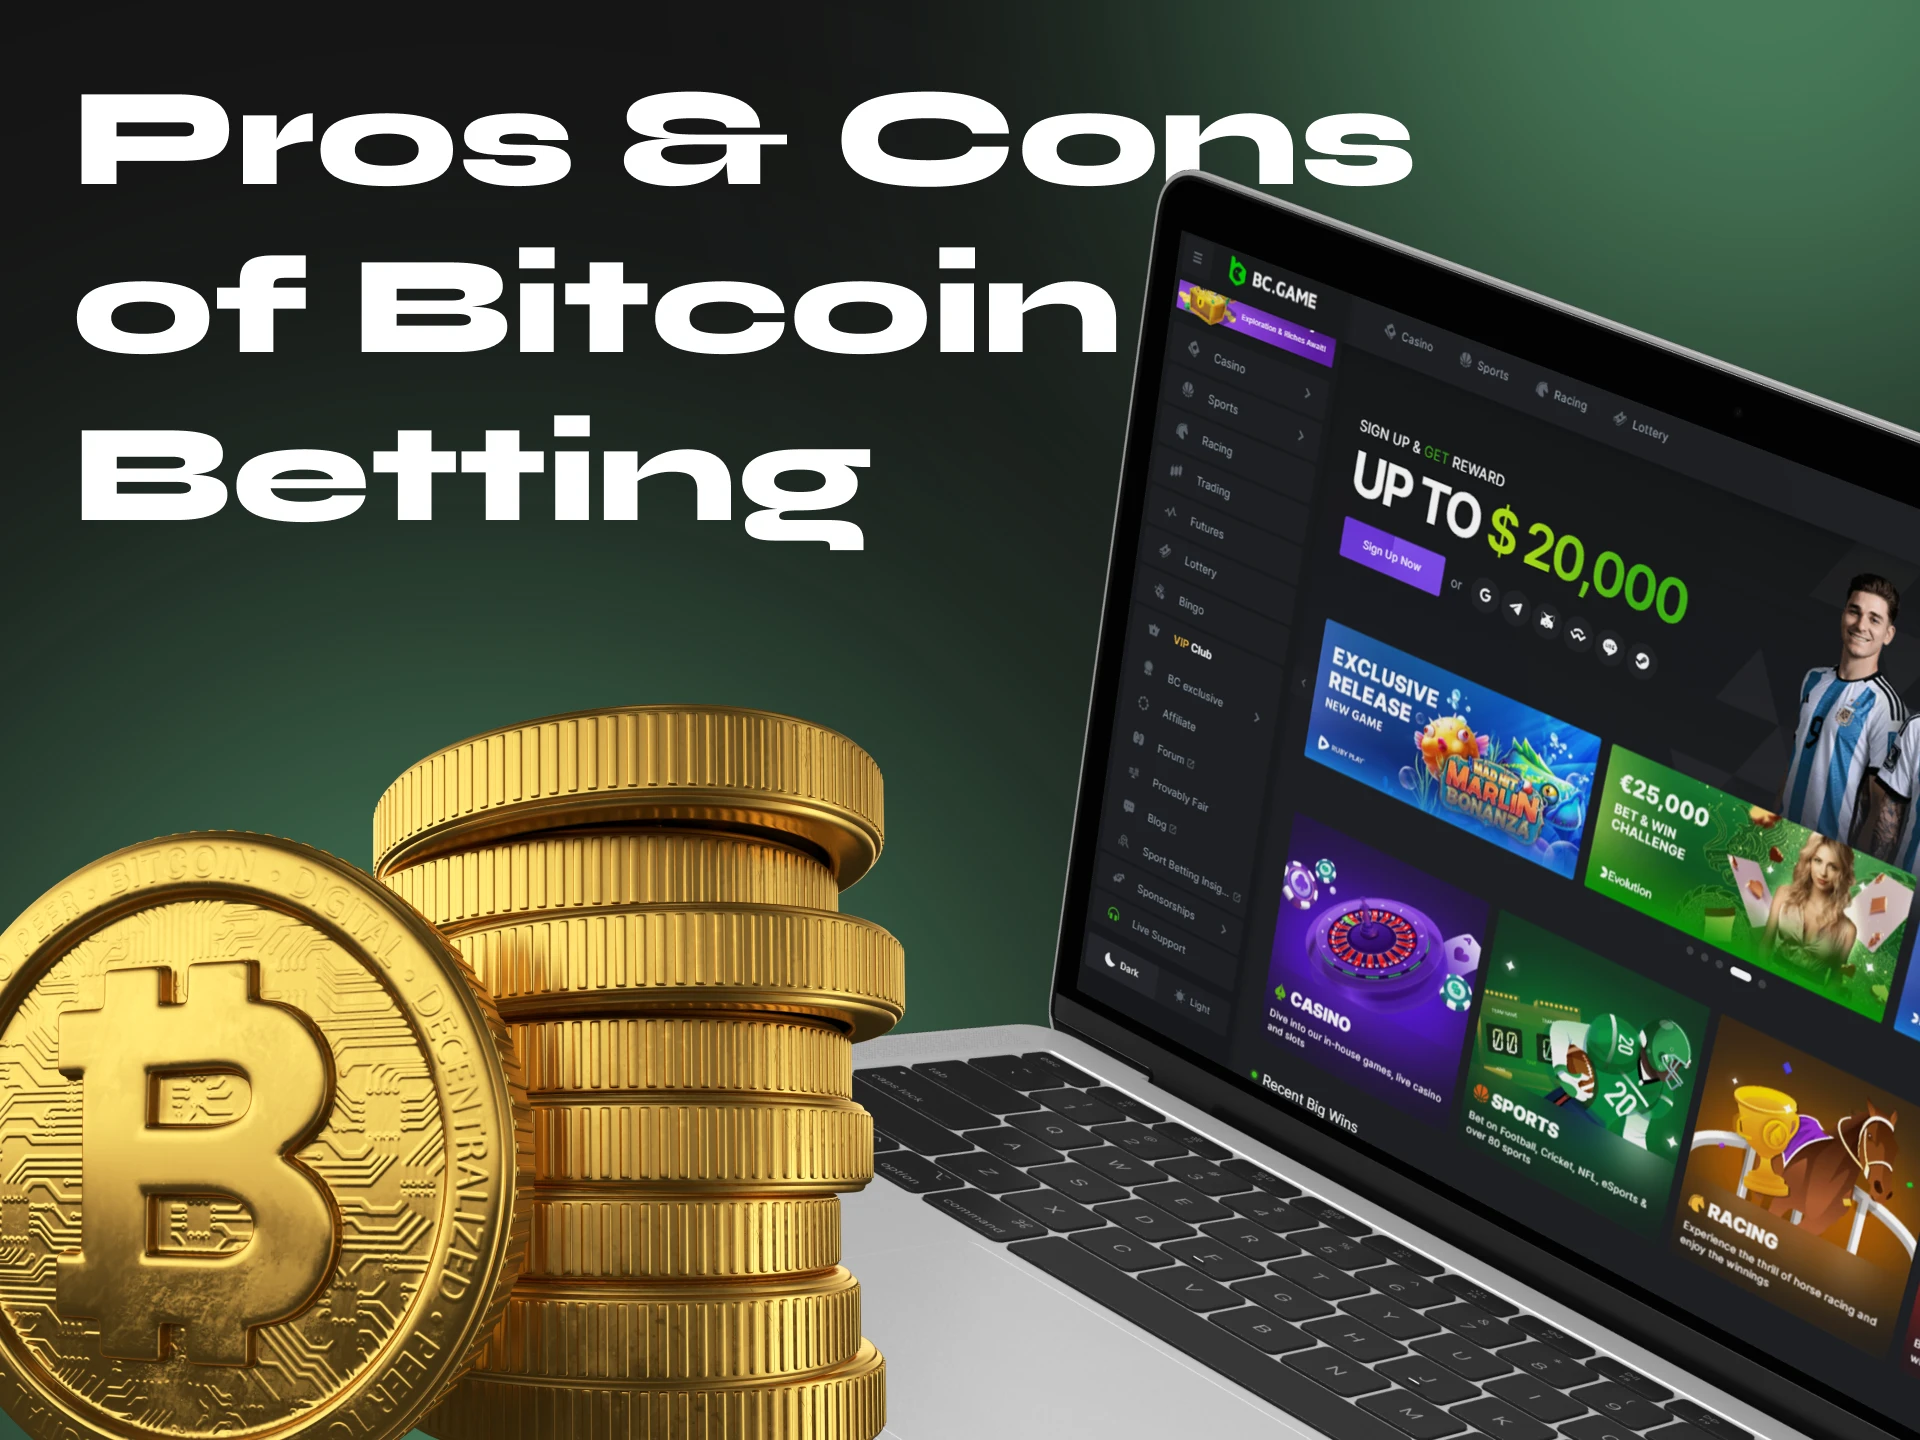 Before betting using cryptocurrency, learn about the pros and cons in this article.